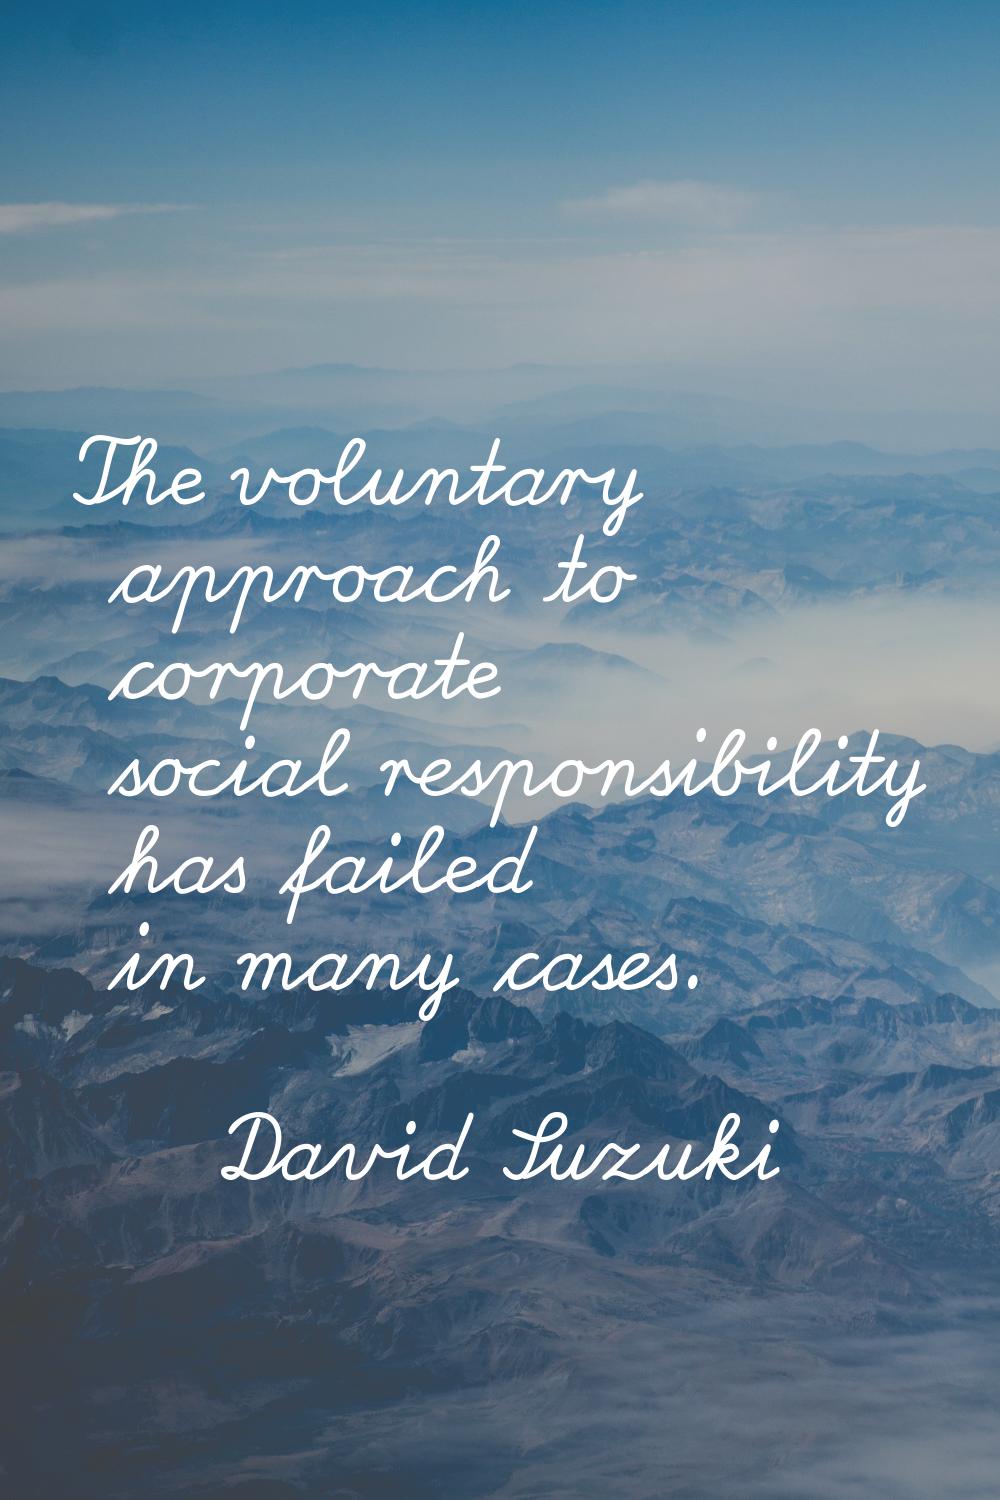 The voluntary approach to corporate social responsibility has failed in many cases.